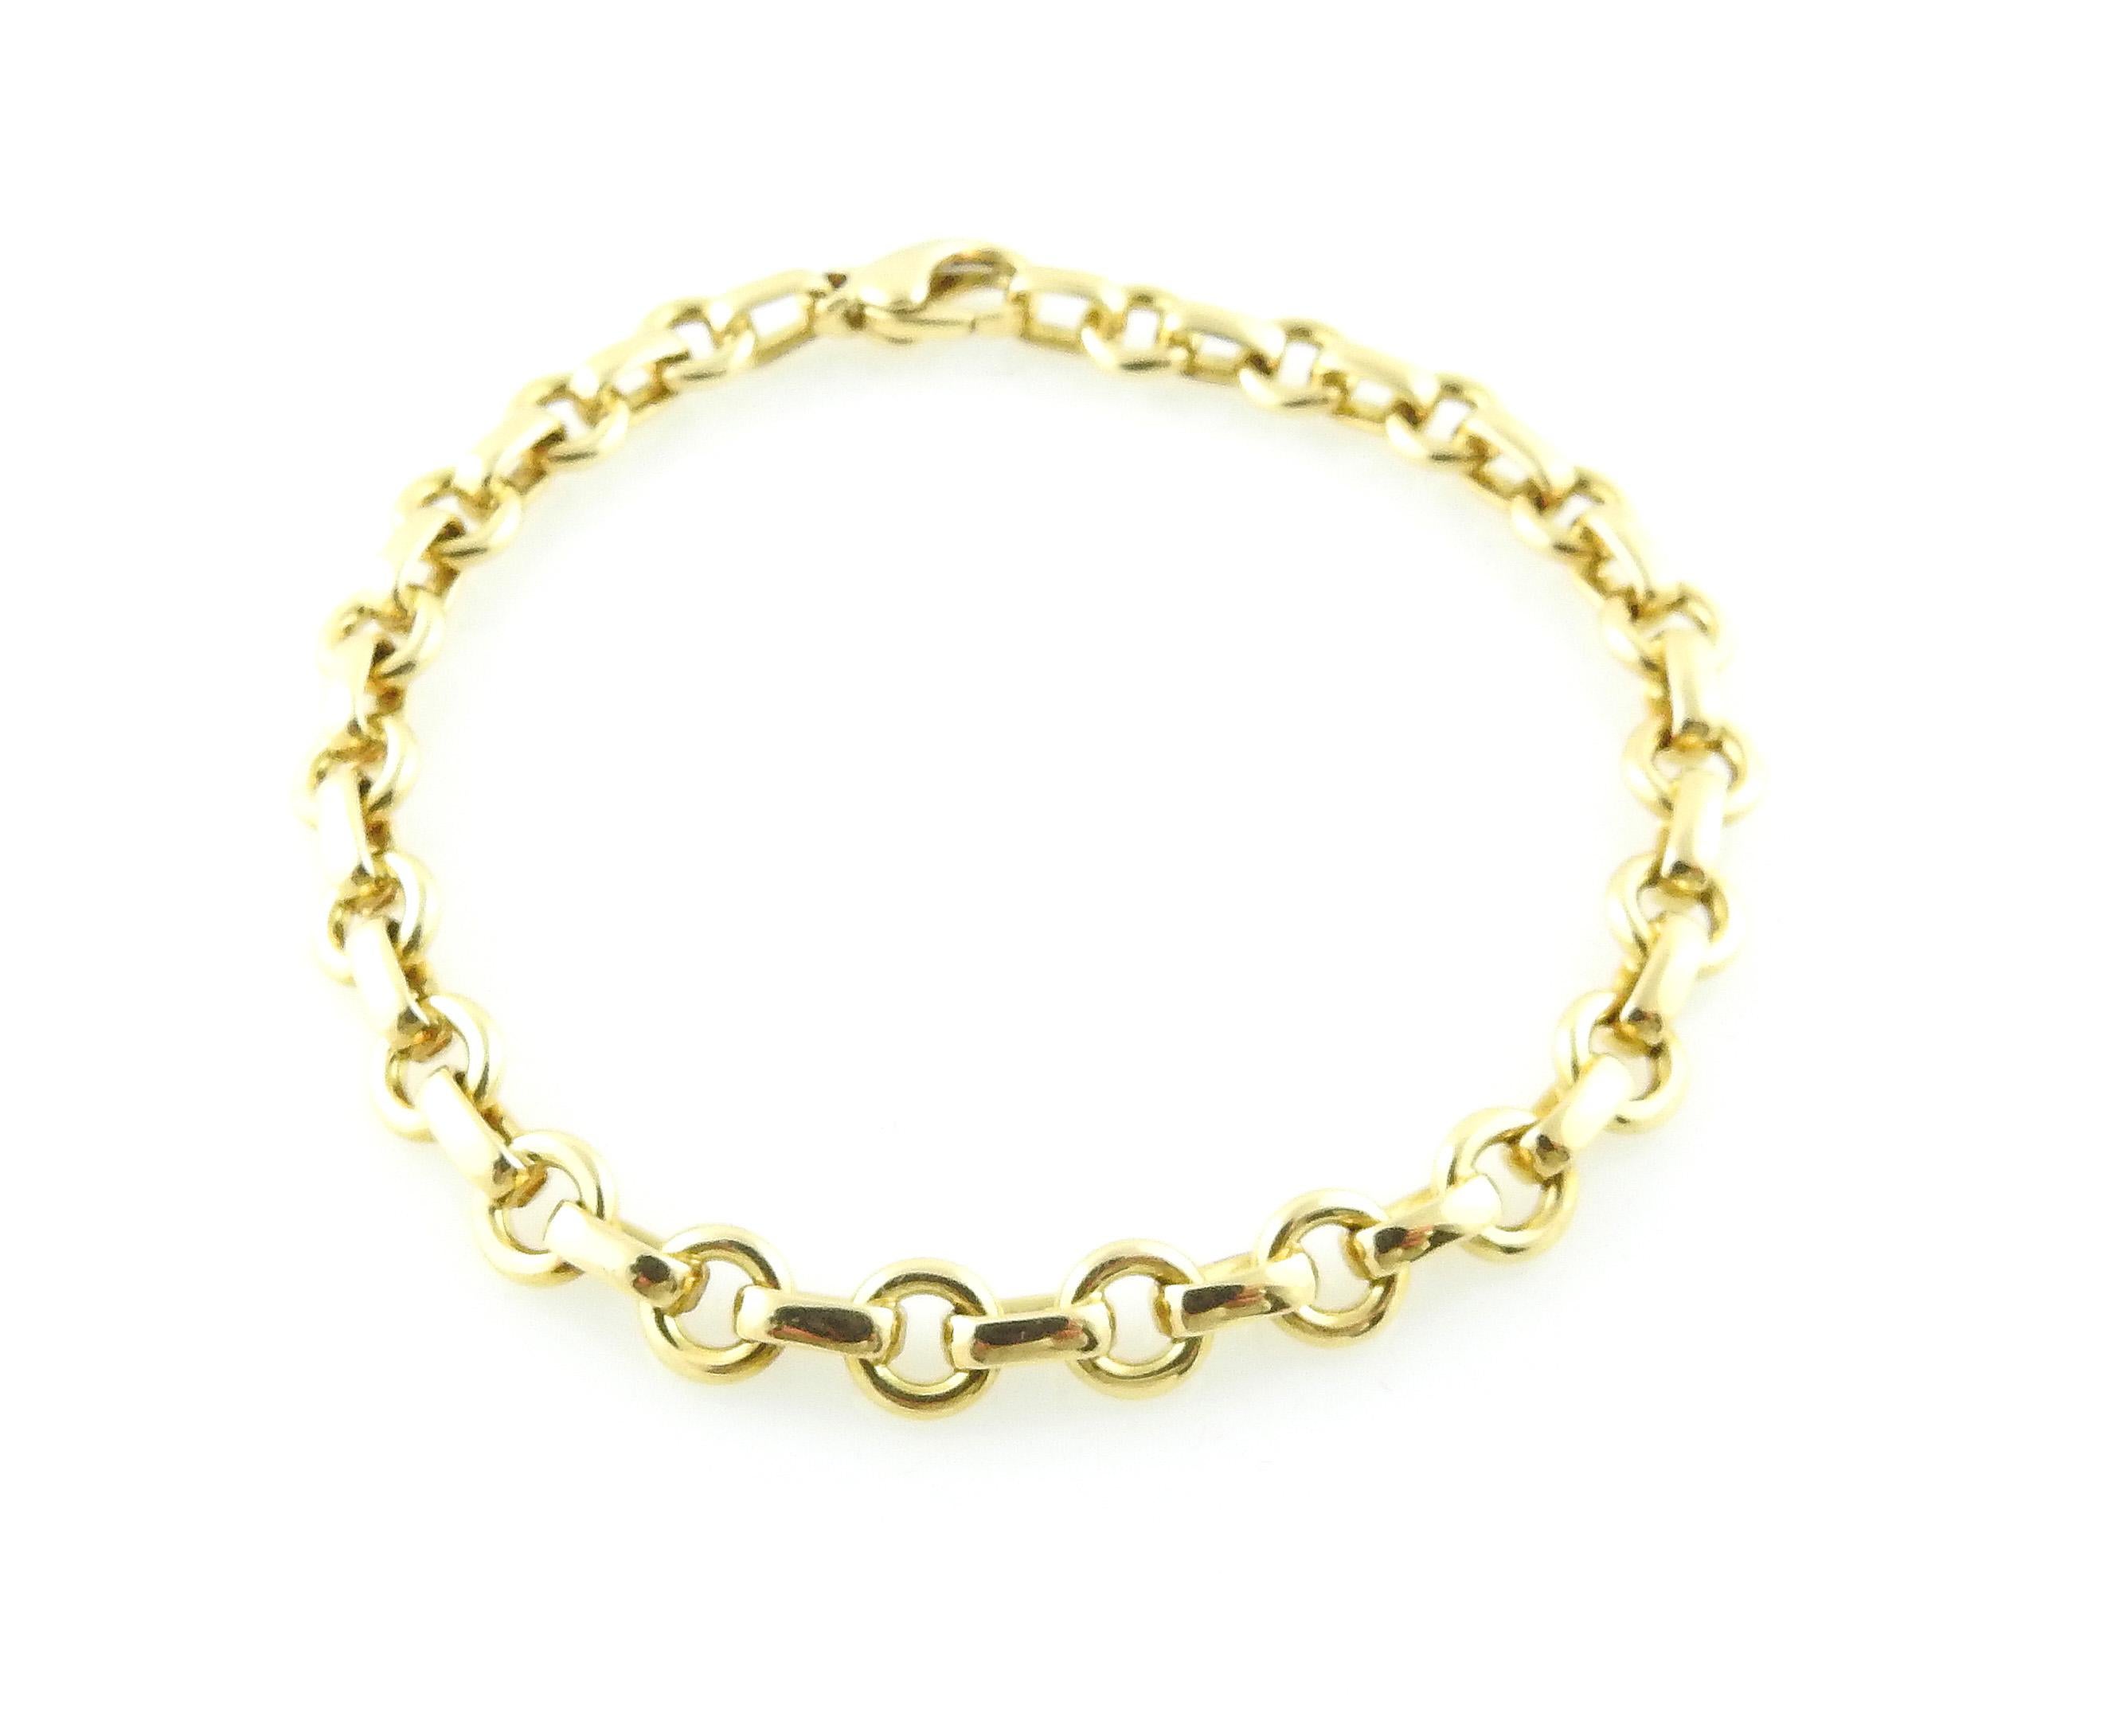 Tiffany & Co. 18K Yellow Gold Oval and Circle Link Charm Bracelet 7